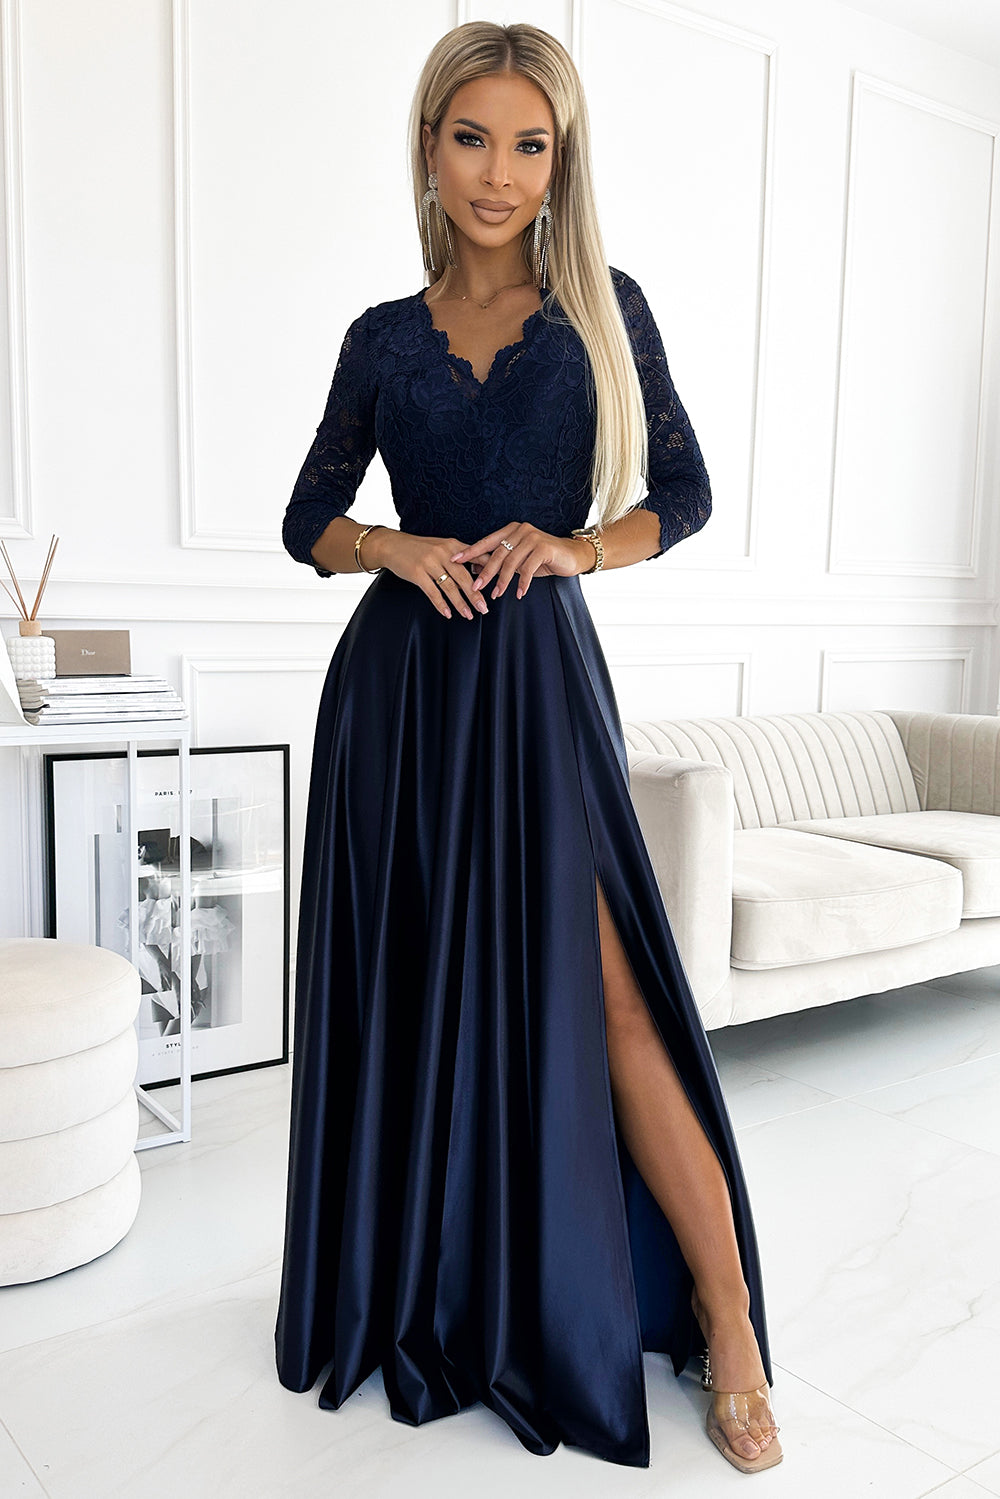 309-7 AMBER lace long satin dress with a neckline - dark blue